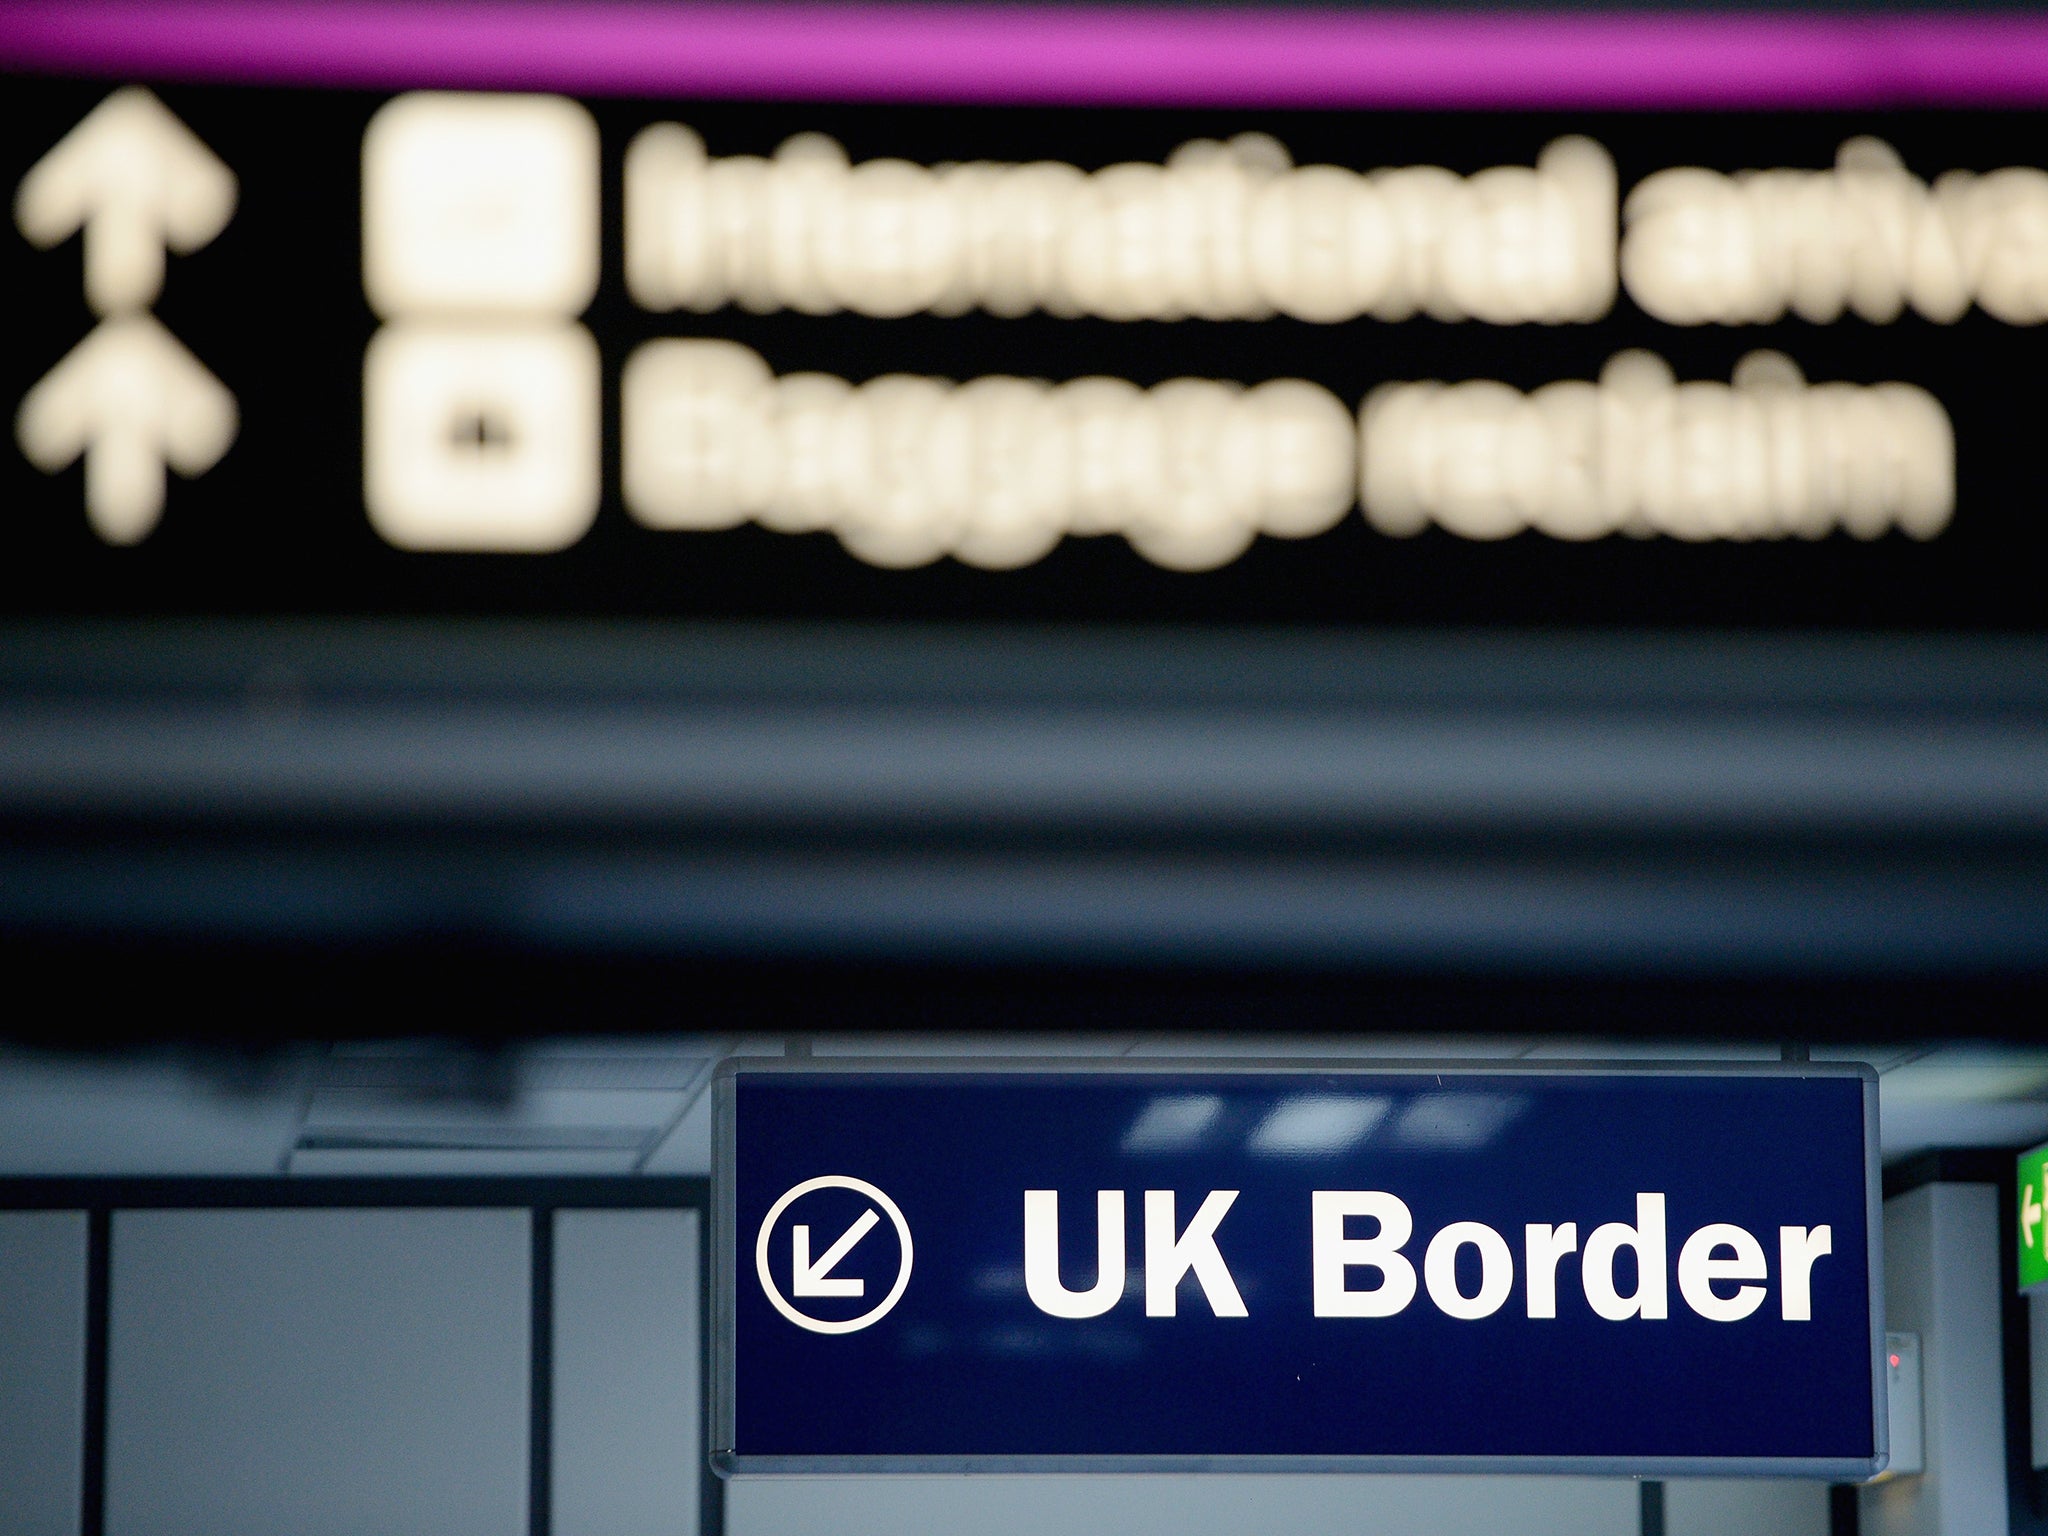 A total of 724,200 people from outside the EU were given permission to remain in the UK